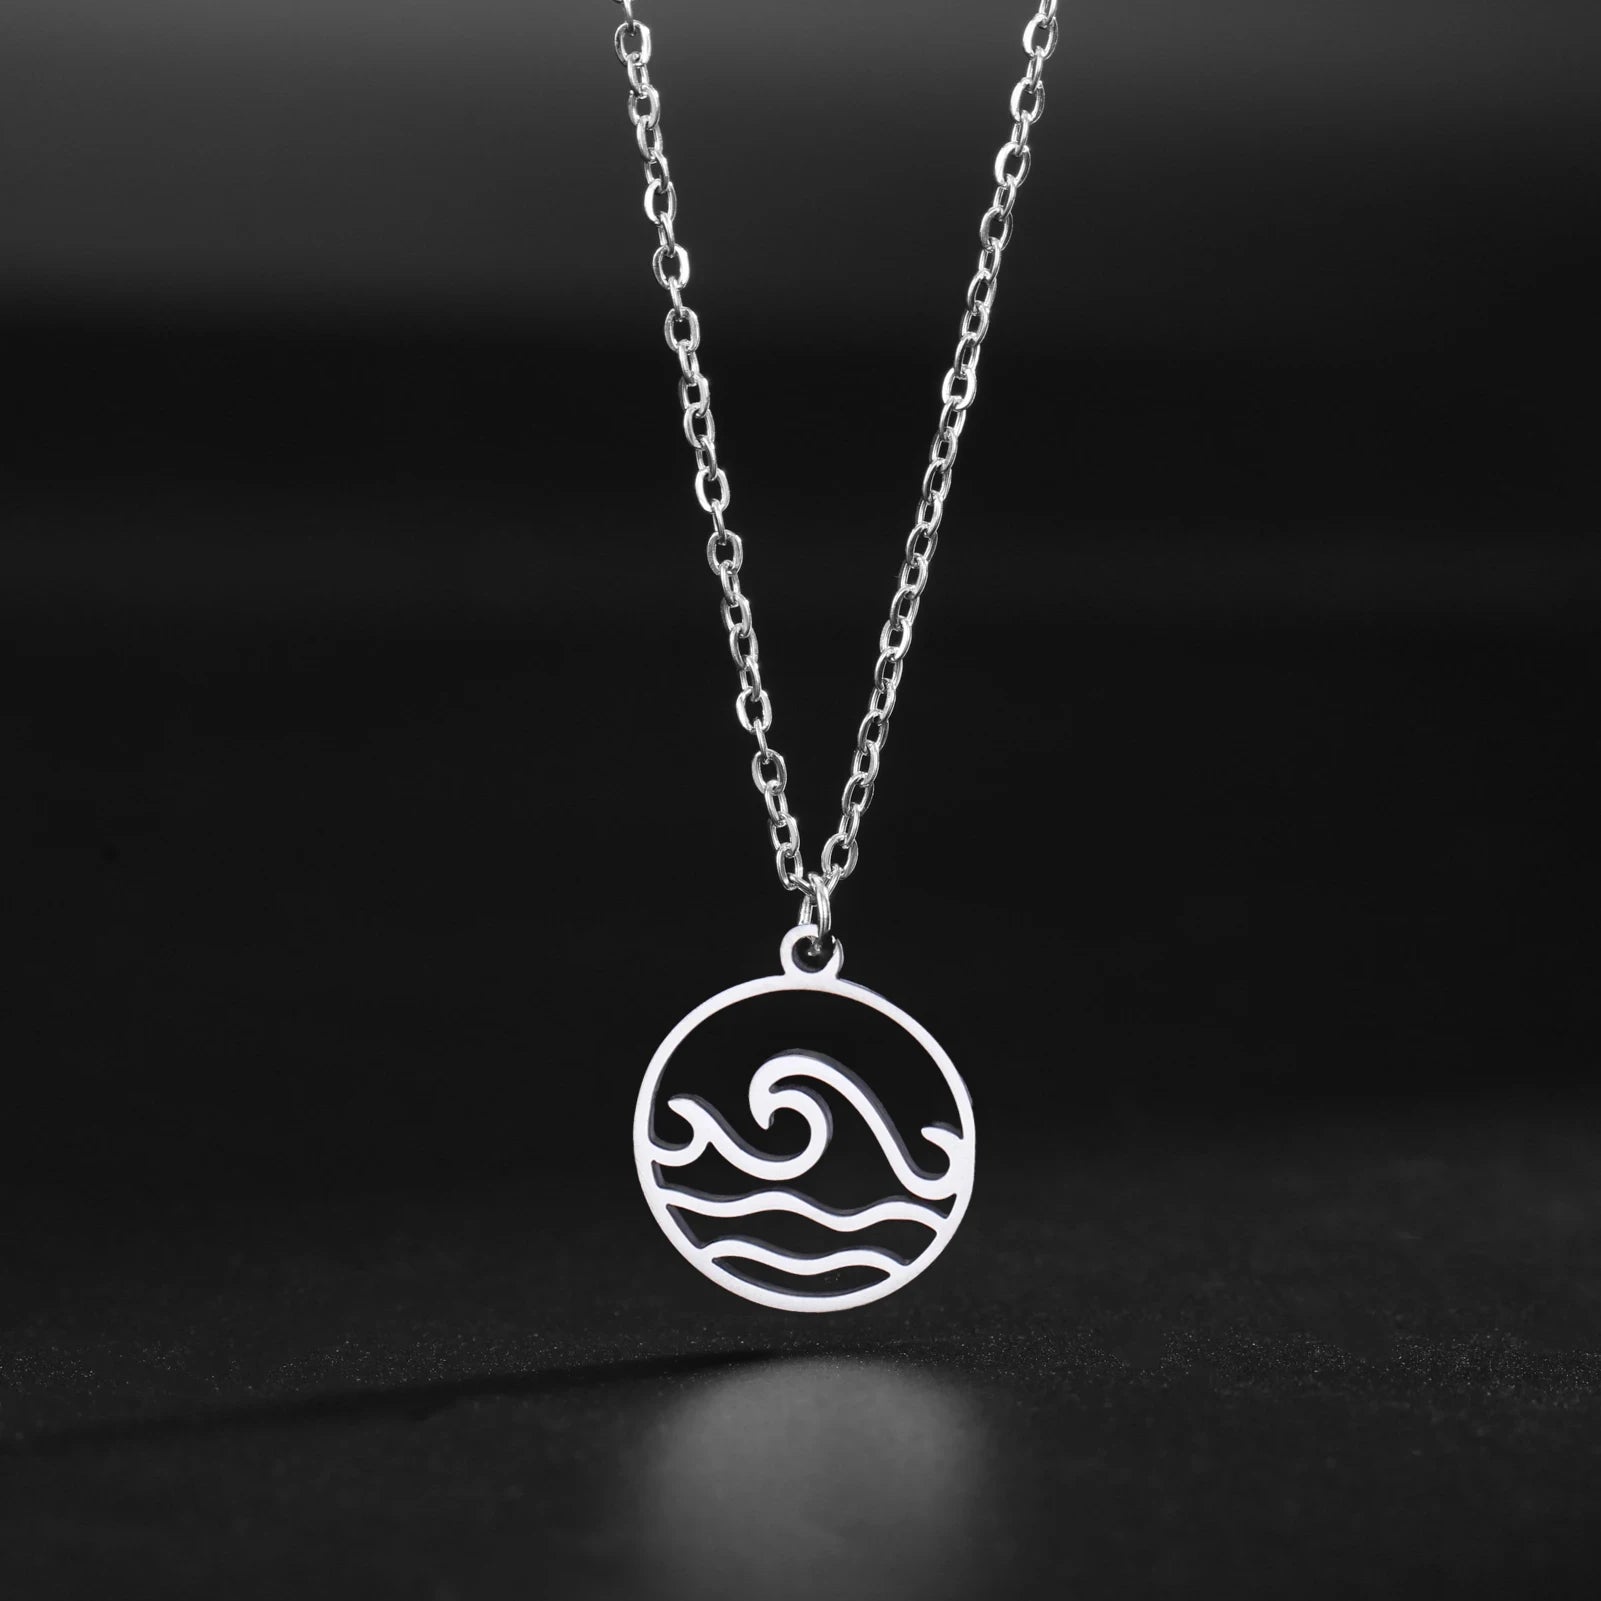 Sea Wave Stainless Steel Pendant Necklace - Madeinsea©